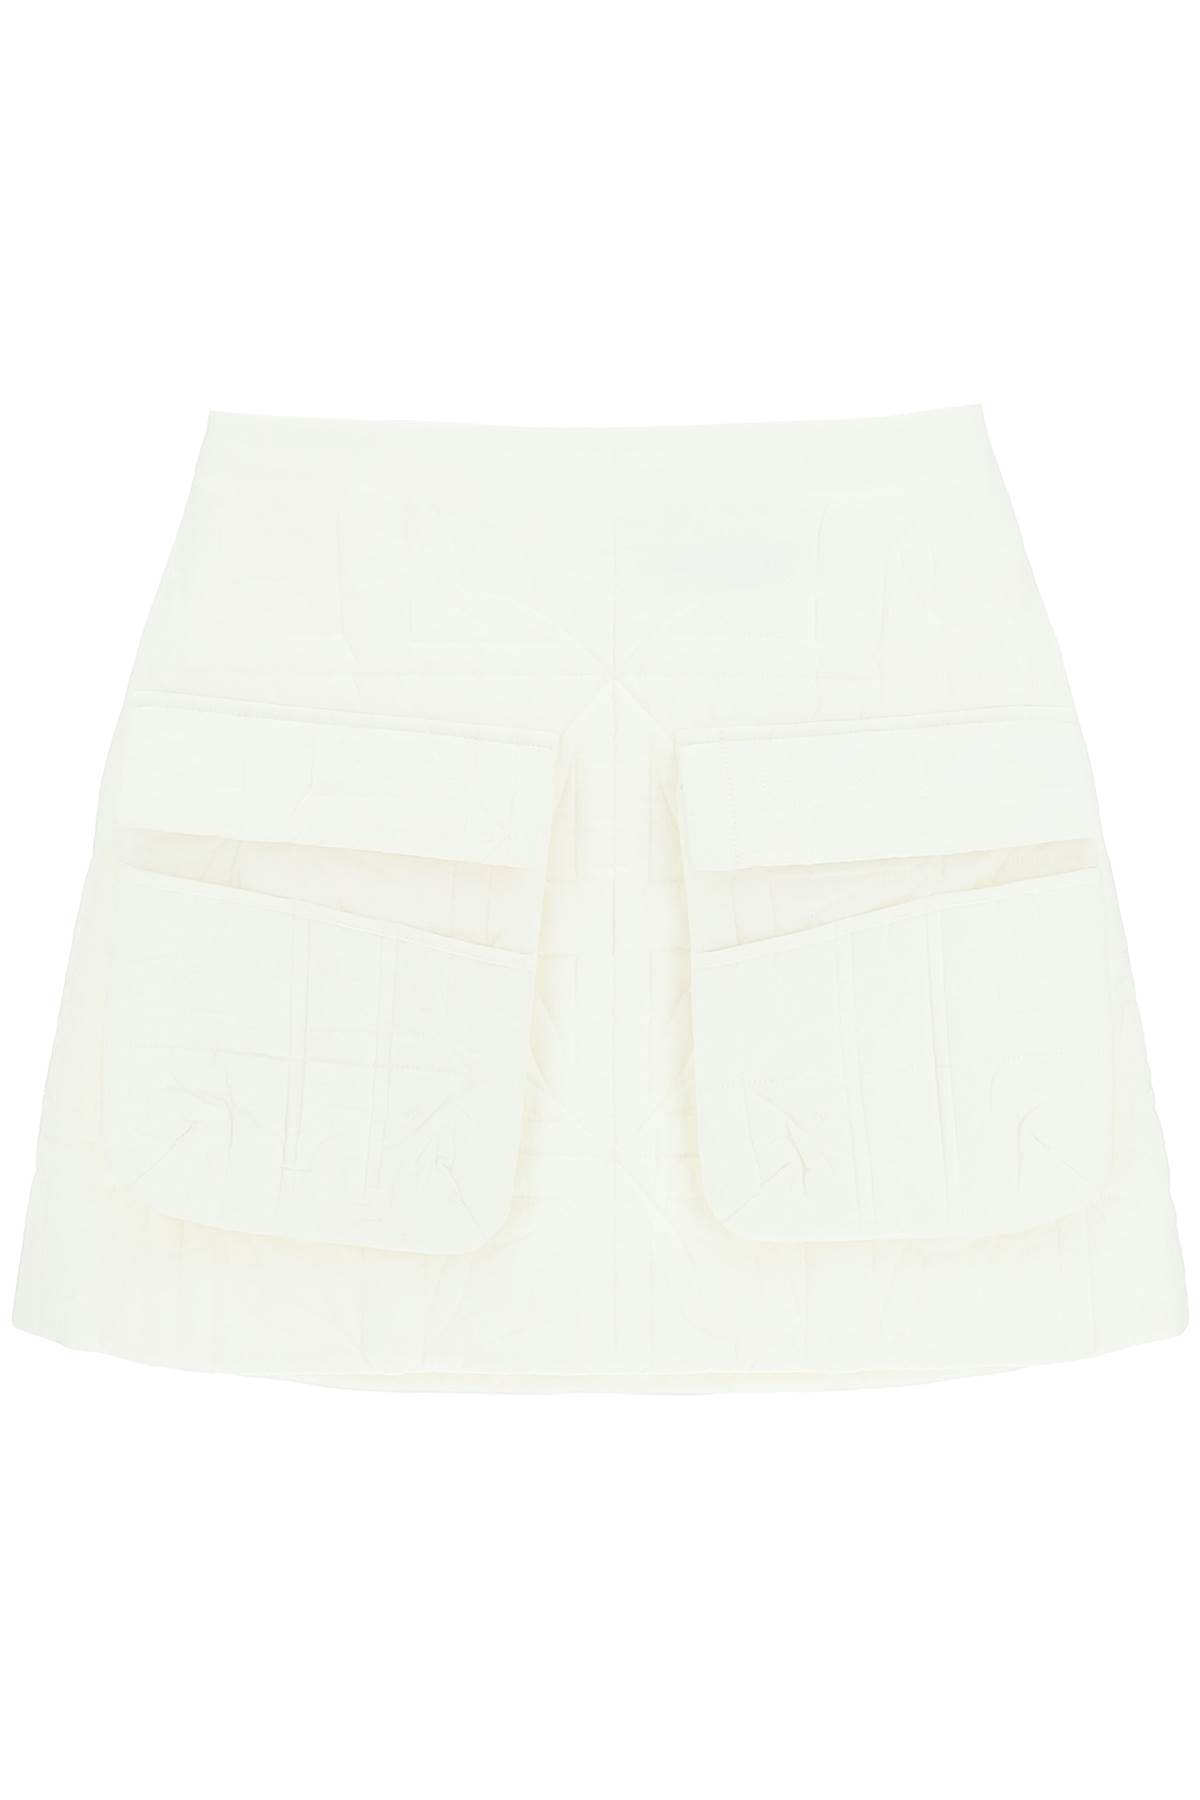 SIMONE ROCHA QUILTED MINI SKIRT WITH OVERSIZED POCKETS